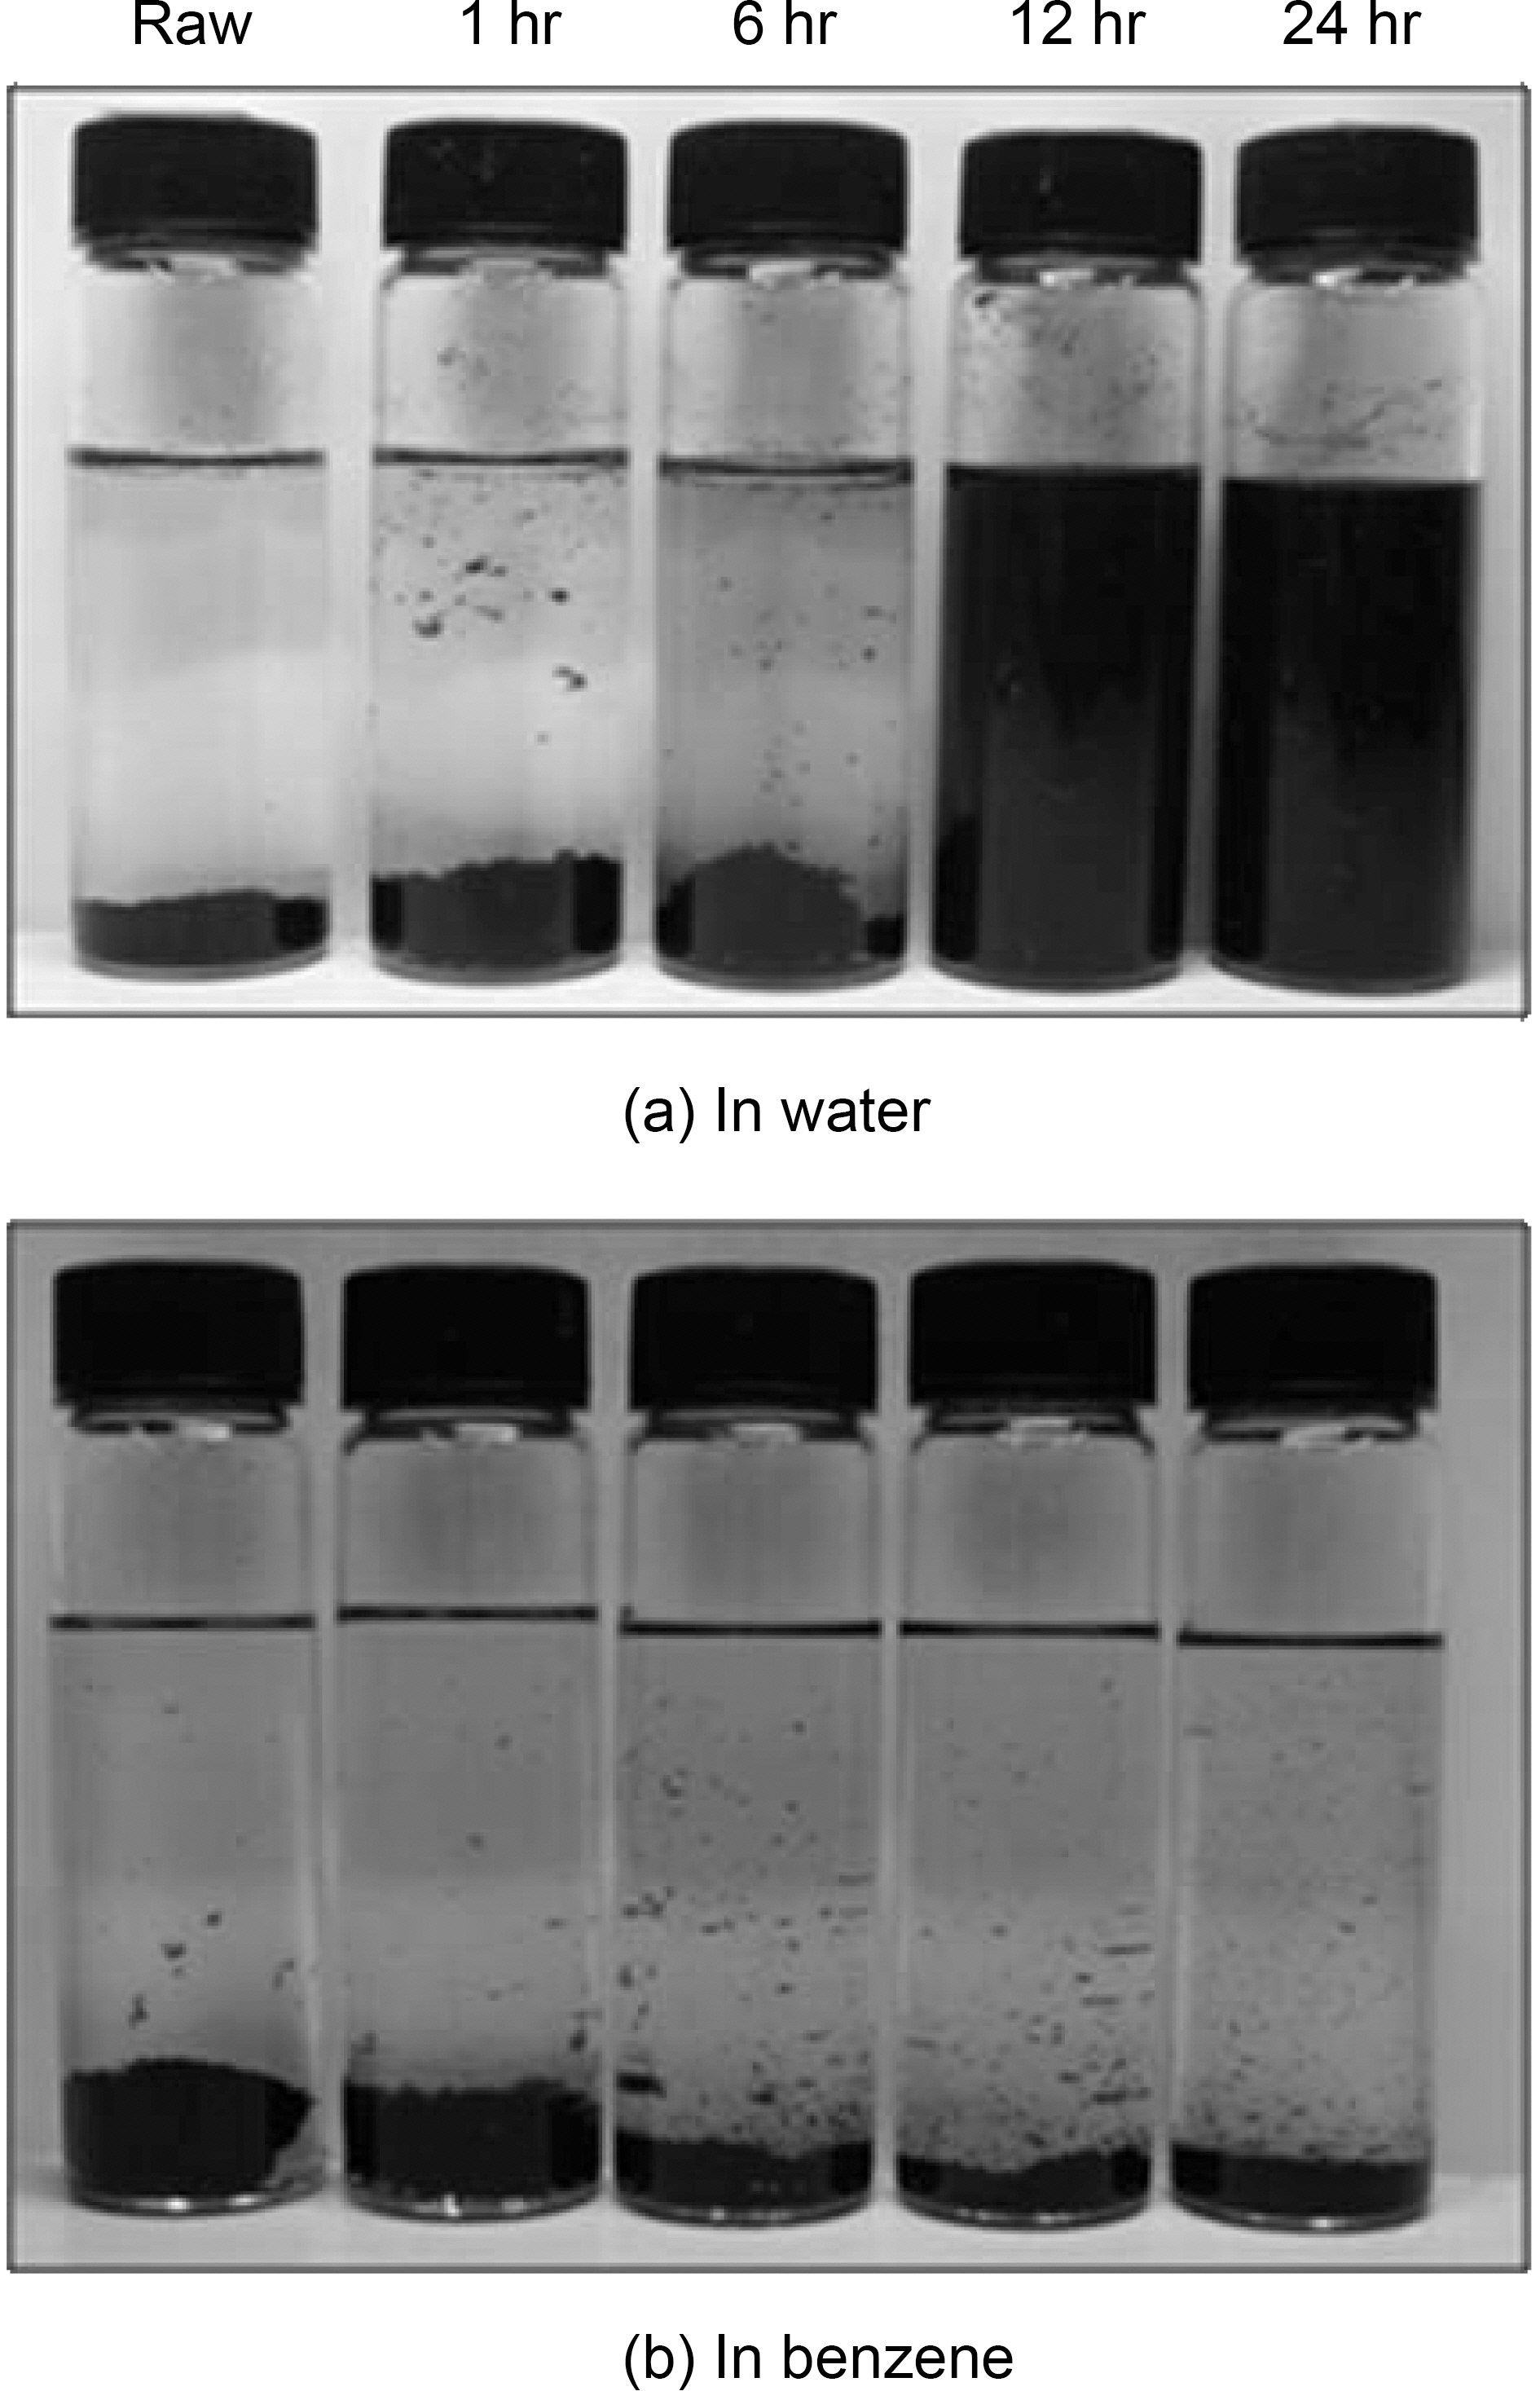 Effect of ozone treatment on the dispersive stability of MWNT in water (a) and benzene (b) after 7 days as a function of ozone exposure time.